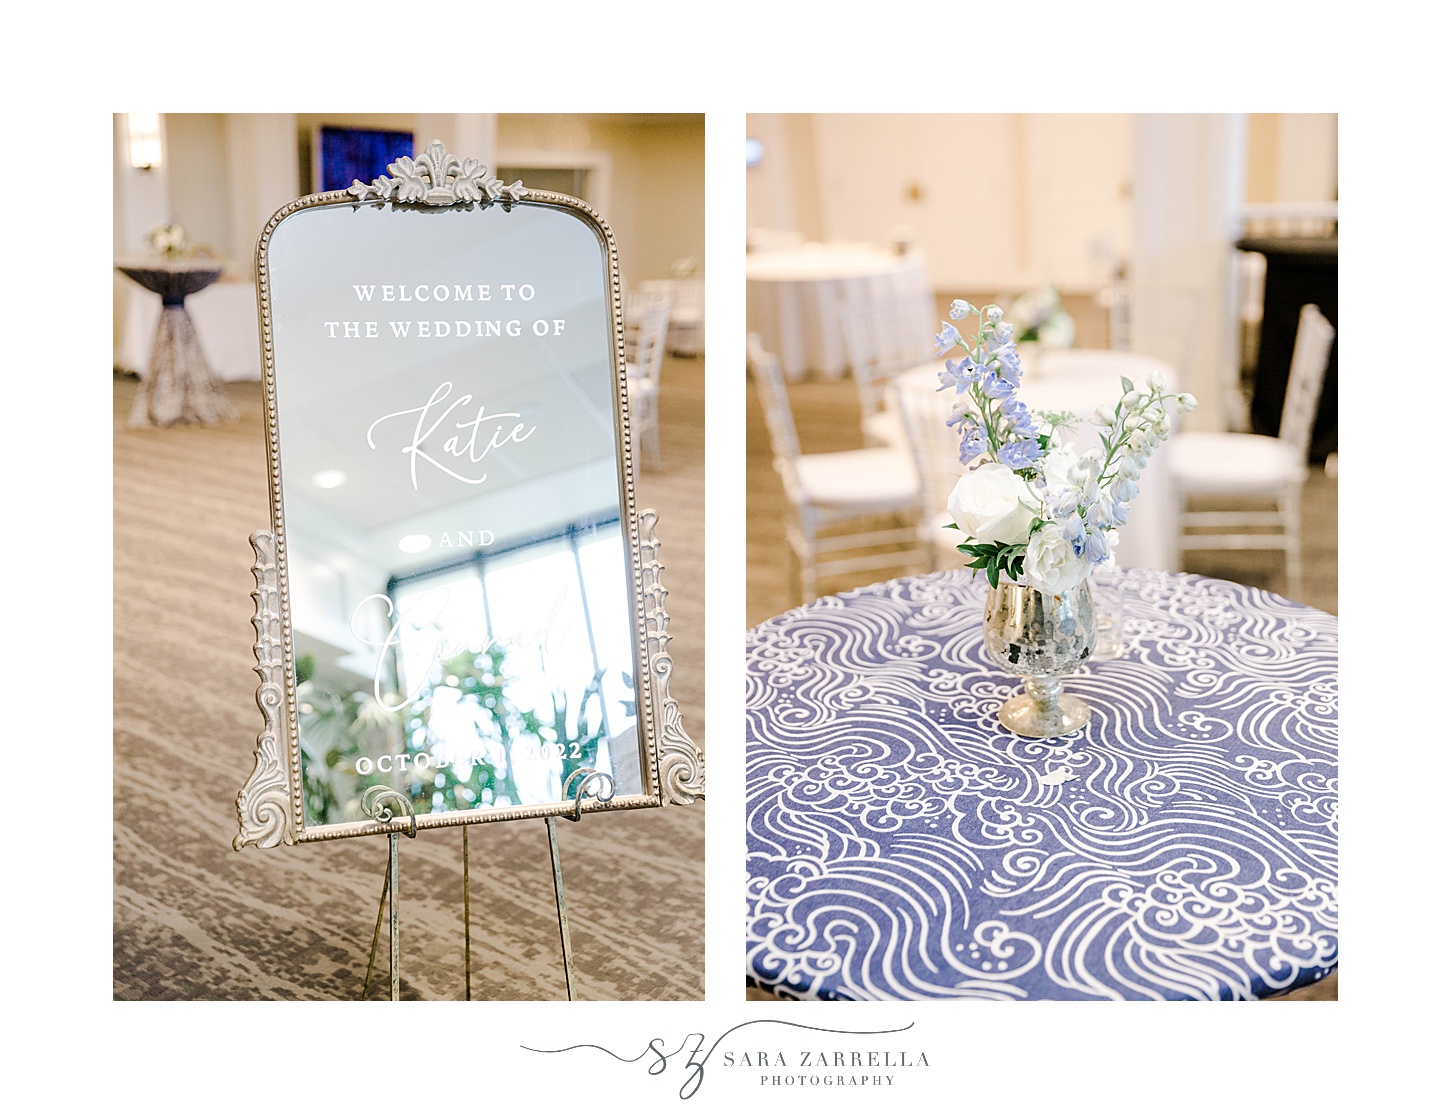 wedding reception welcome sign and florals on blue table cloth